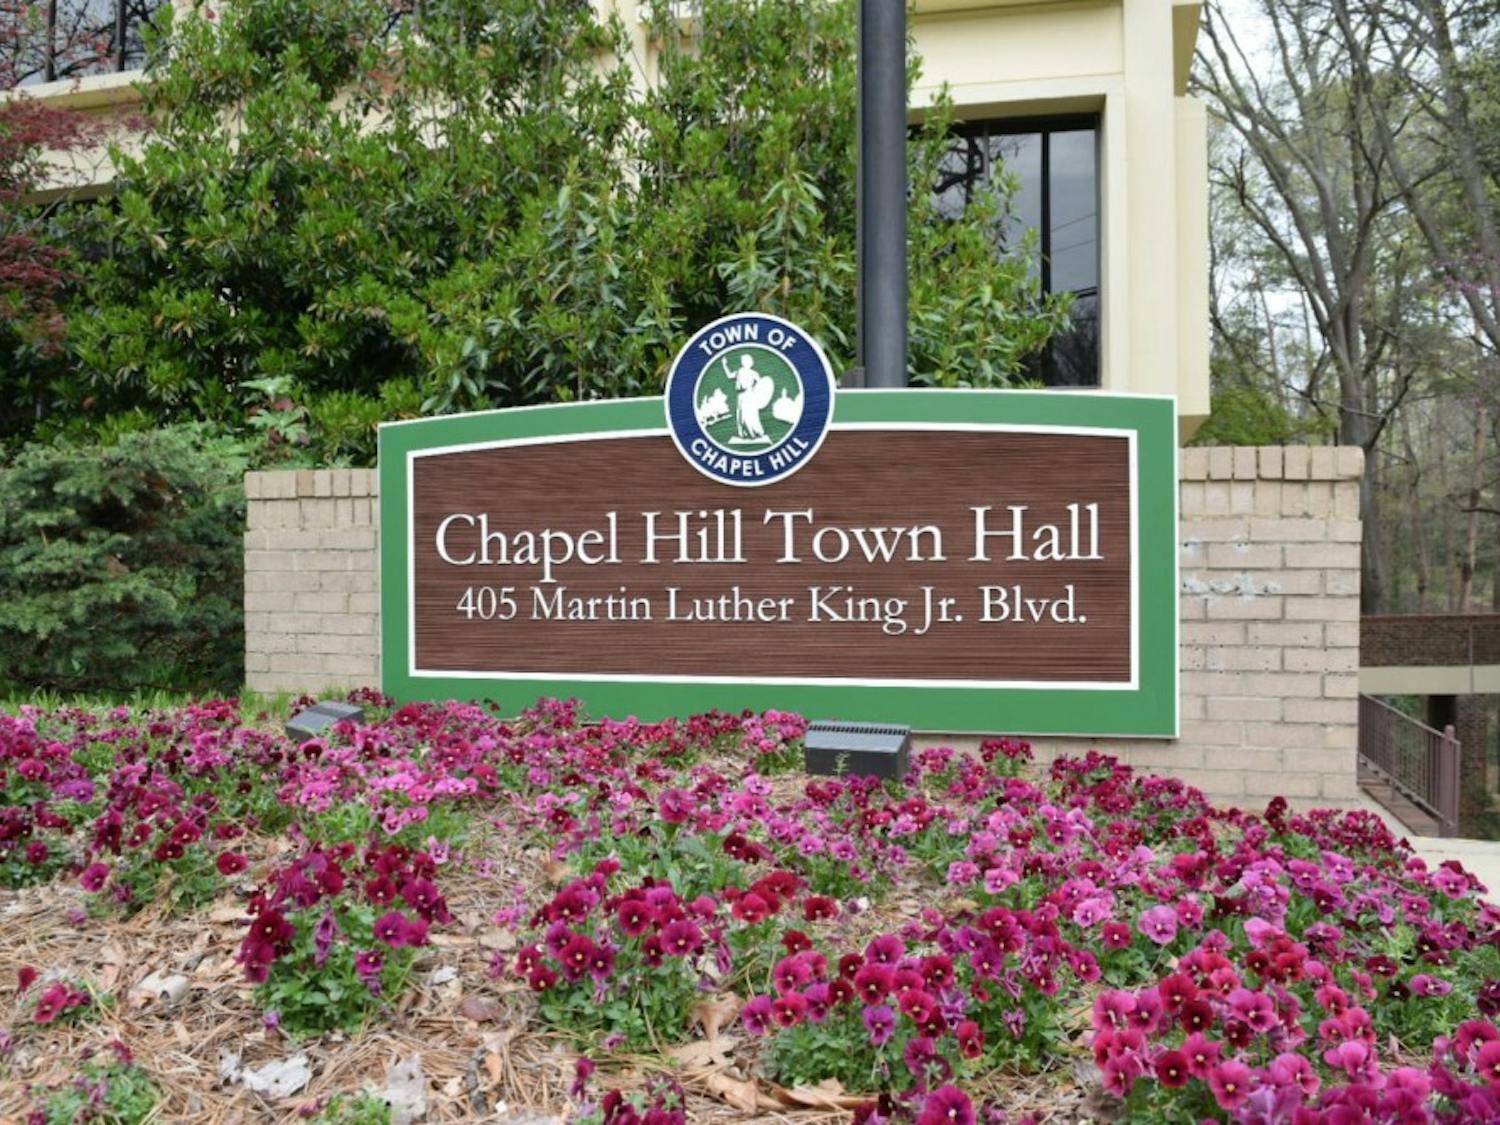 The town of Chapel Hill is providing the Peoples Academy, an opportunity for people to take classes this fall in order to learn and connect more with their community.